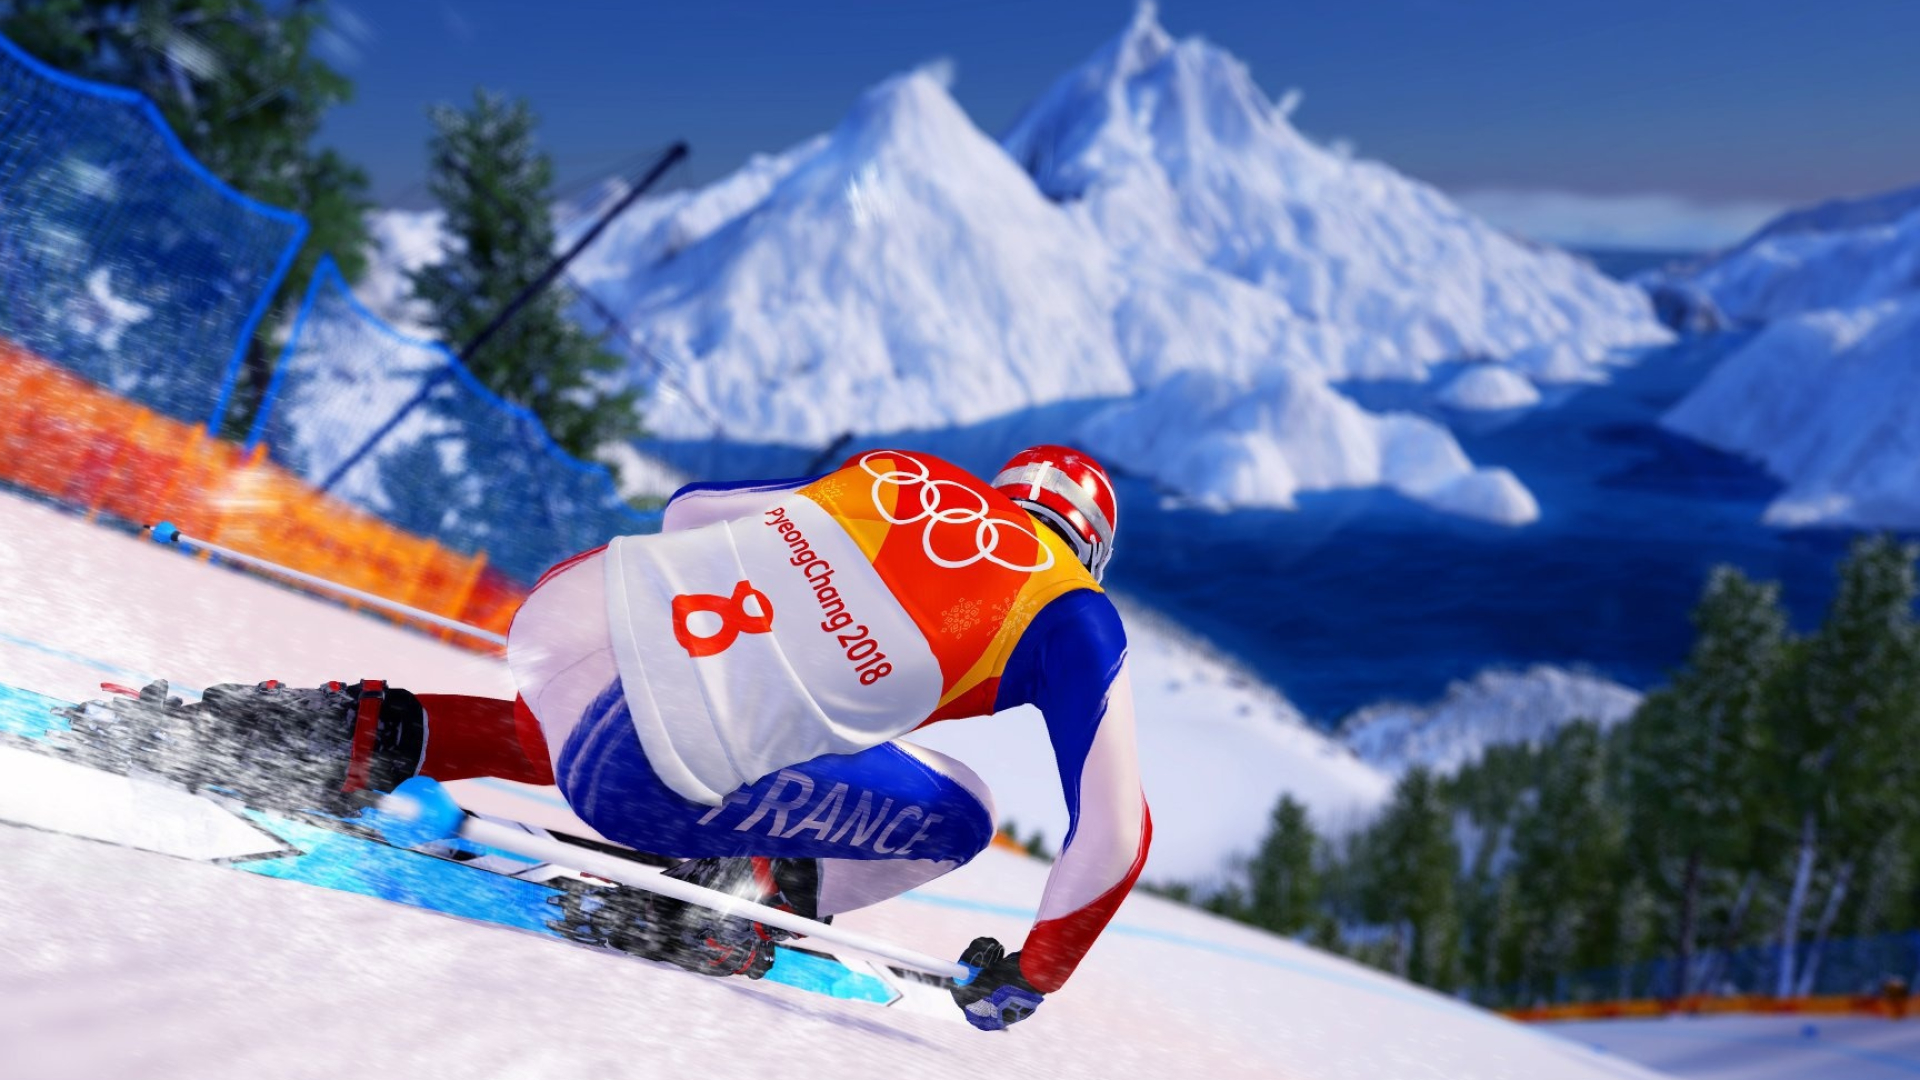 Olympics: The 23rd Winter Olympic Games, PyeongChang, South Korea, Alpine skiing. 1920x1080 Full HD Background.